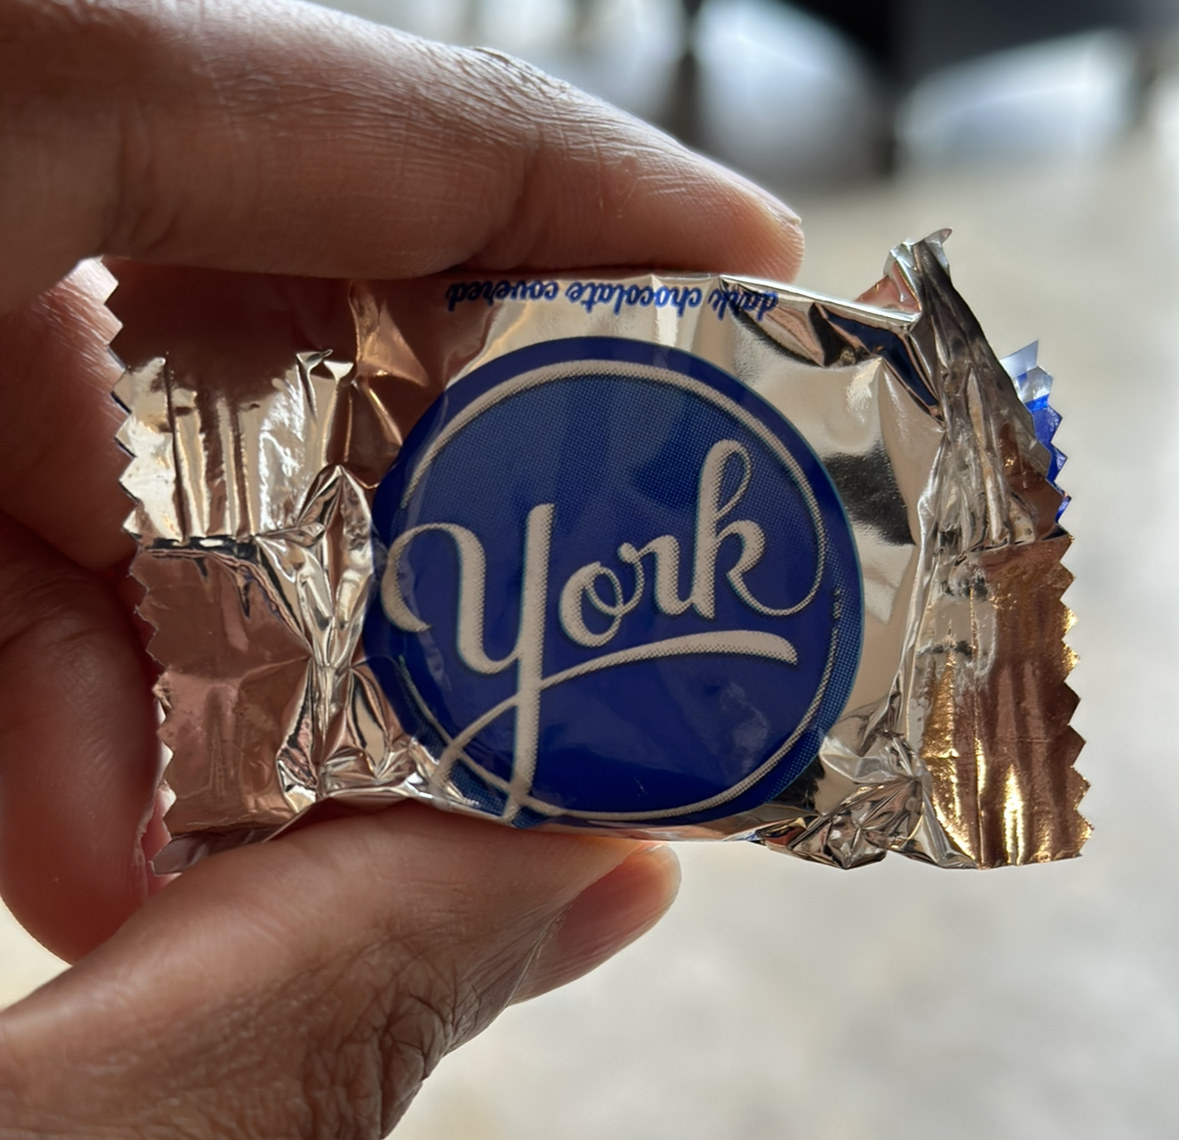 A hand holding a small packet of York Peppermint Patties